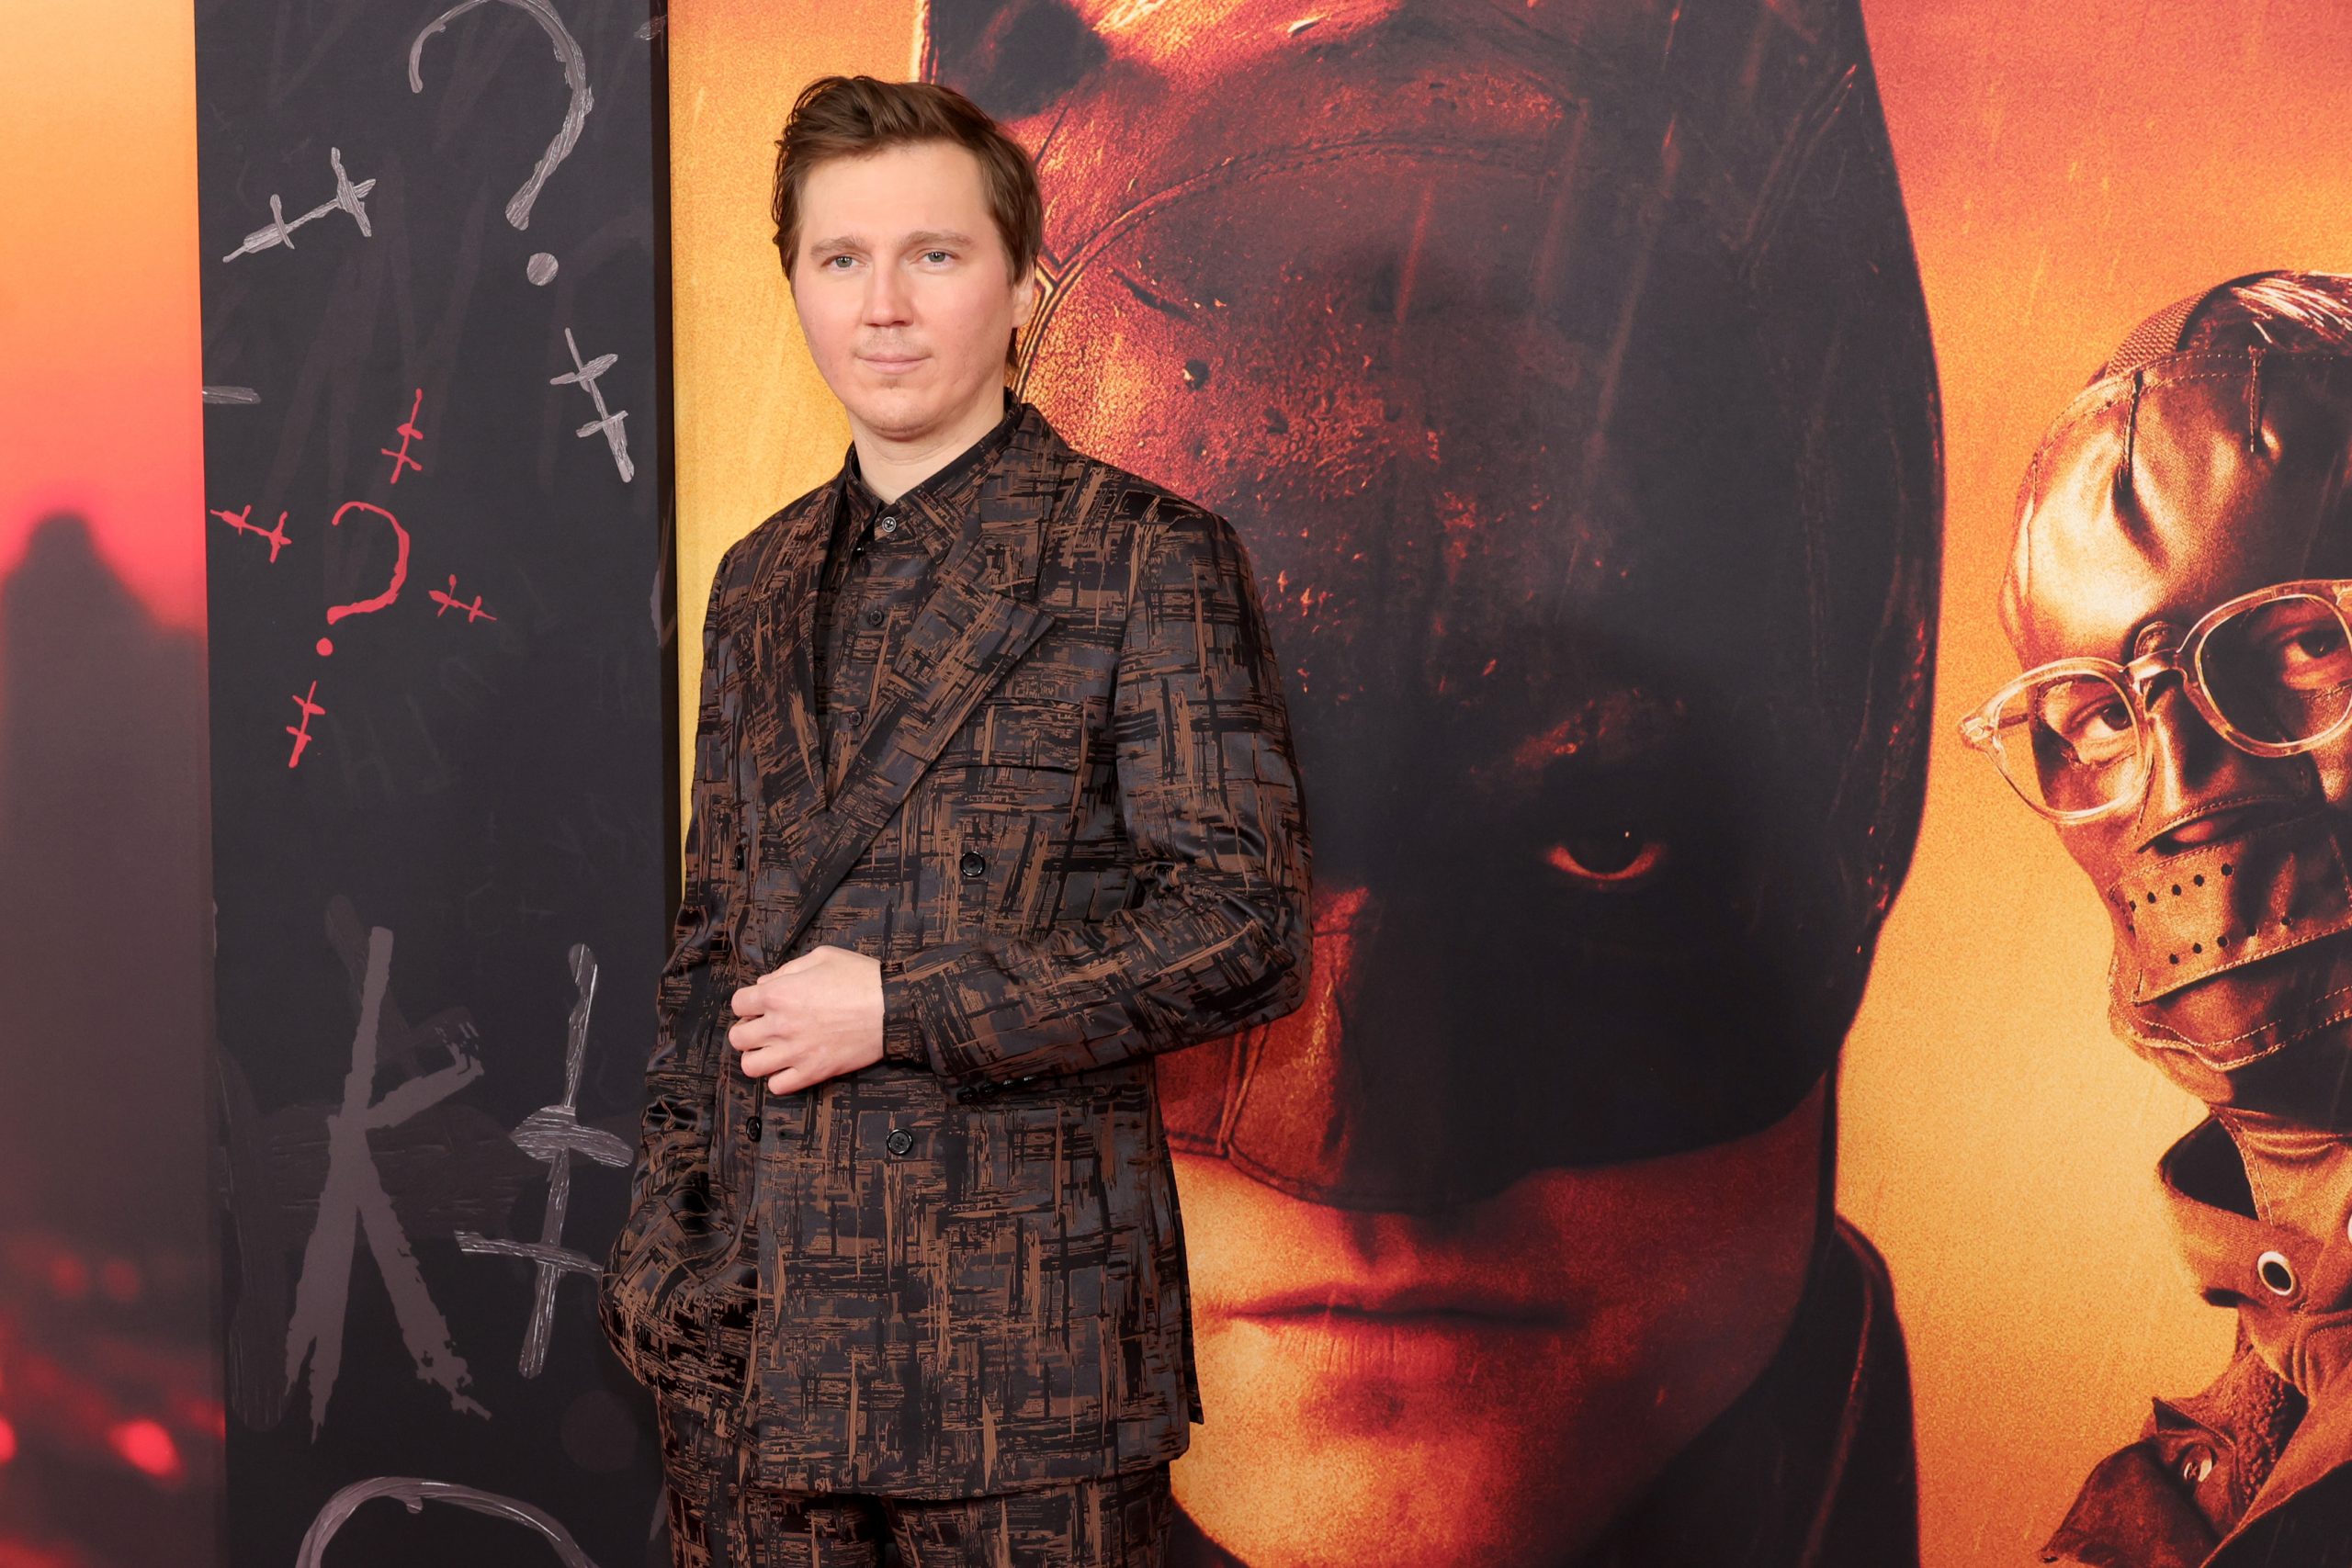 Paul Dano Was 'Really Creepy' While Filming 'The Batman', According to 1  Crew Member